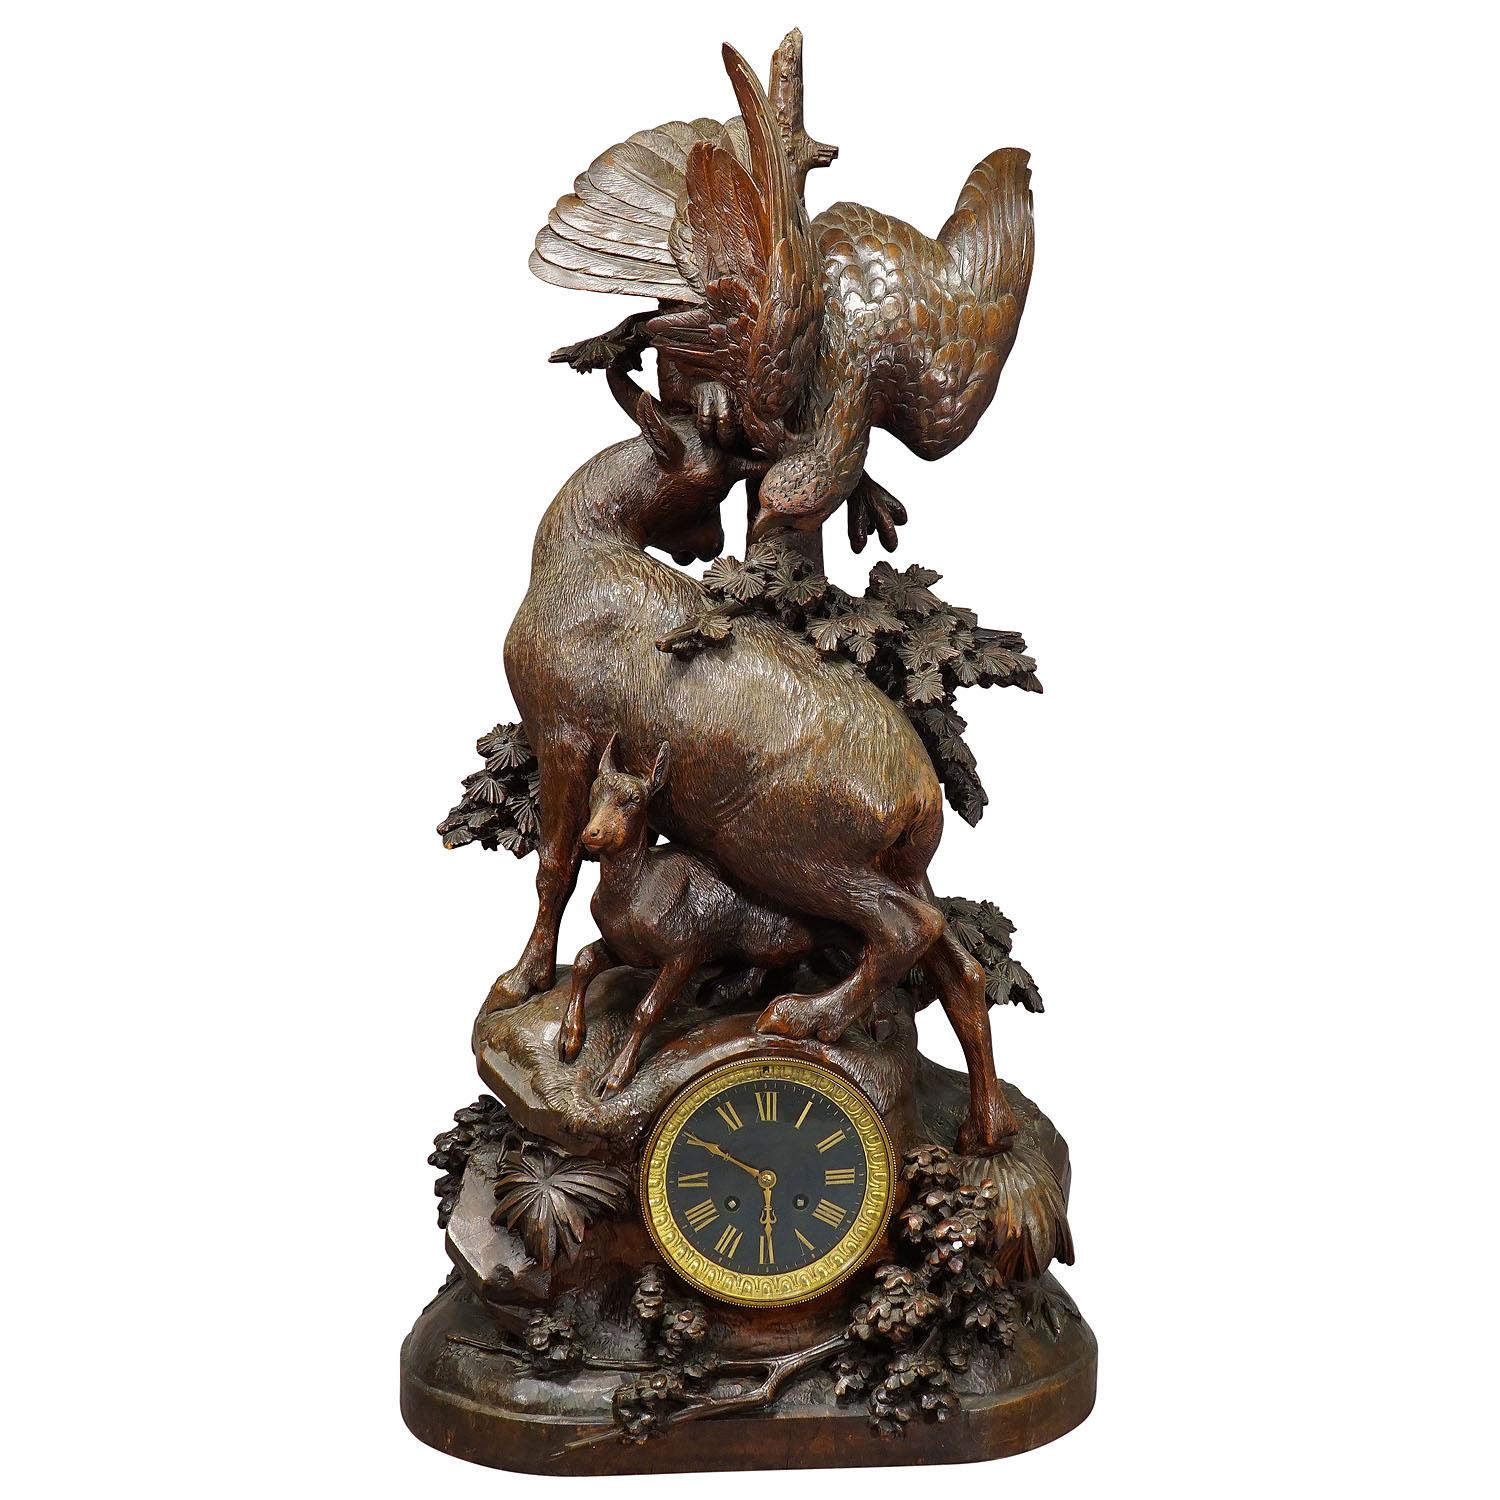 Antique Mantel Clock with Eagle and Chamois Family, ca. 1900

A large Black Forest wooden carved mantel clock with an eagle on top and a chamois defending her child. The clock is embedded in a handcarved wood pile. A masterpiece of Brienz